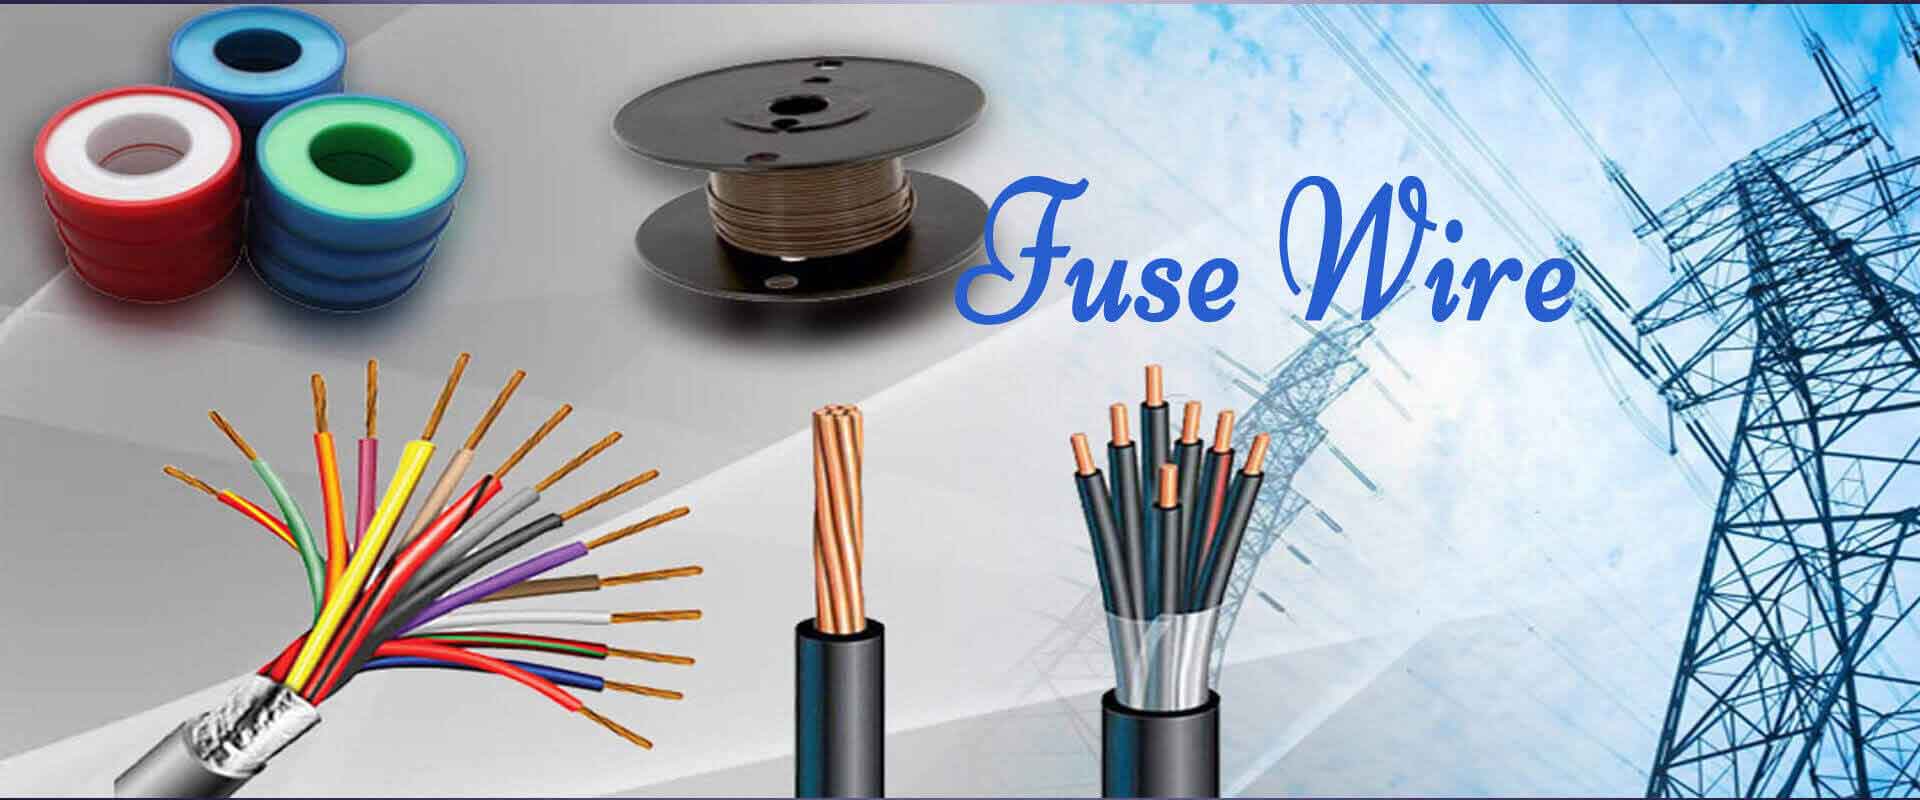 Silver Plated Copper Wire For Fuse In US